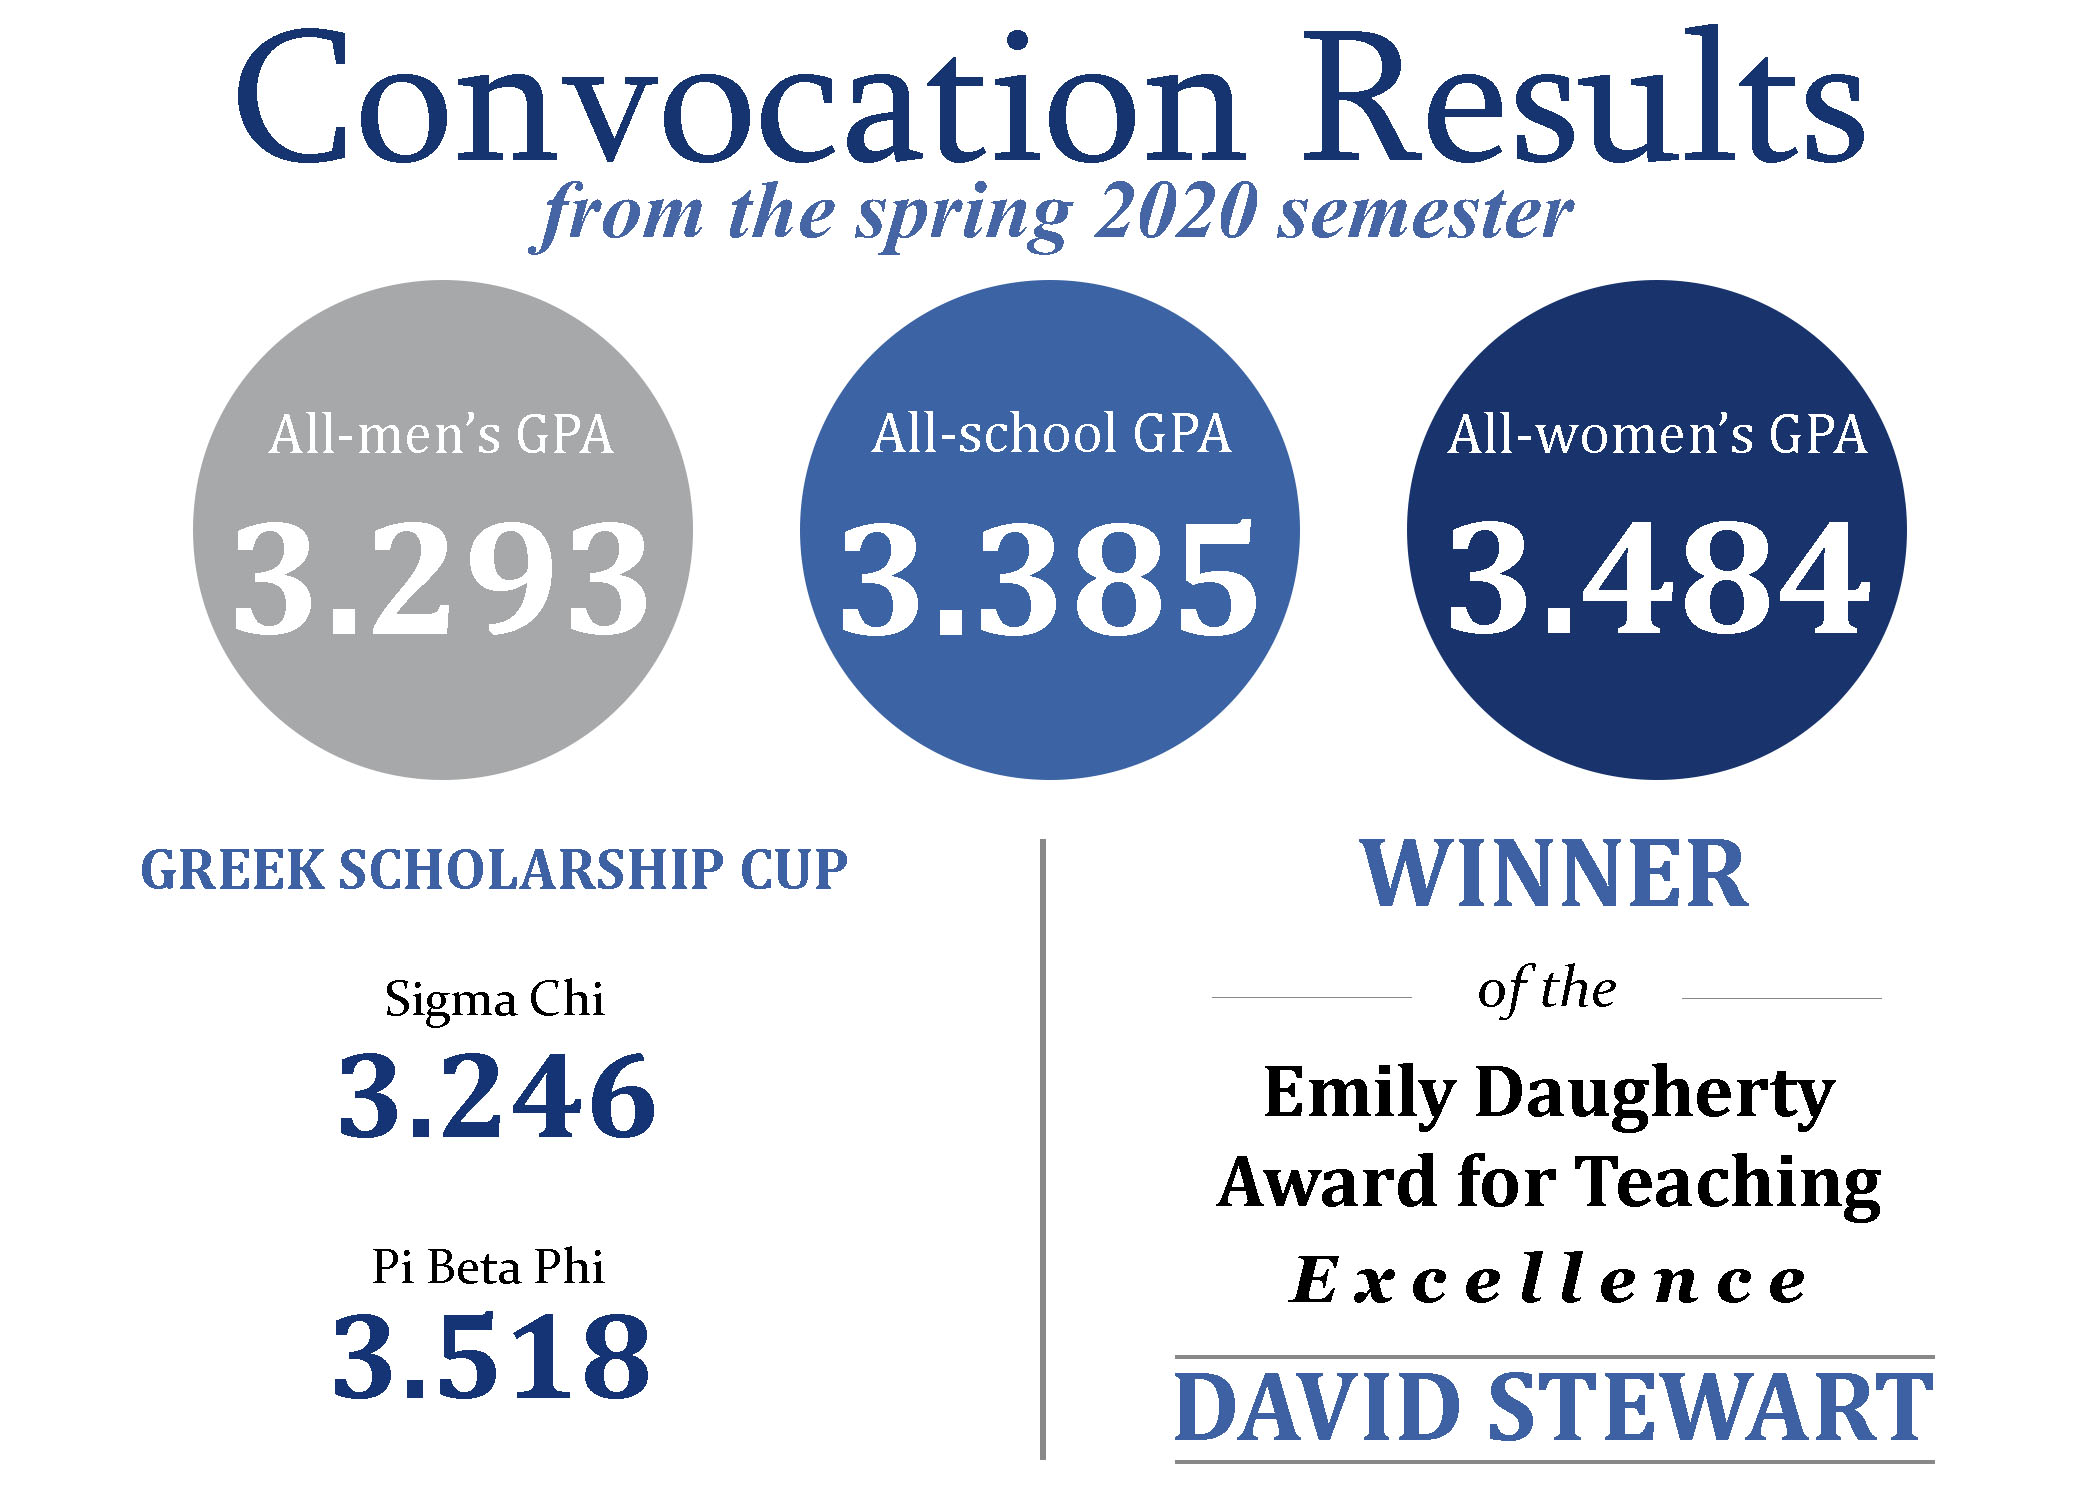 Hillsdale holds spring convocation online, Stewart receives Daugherty Award